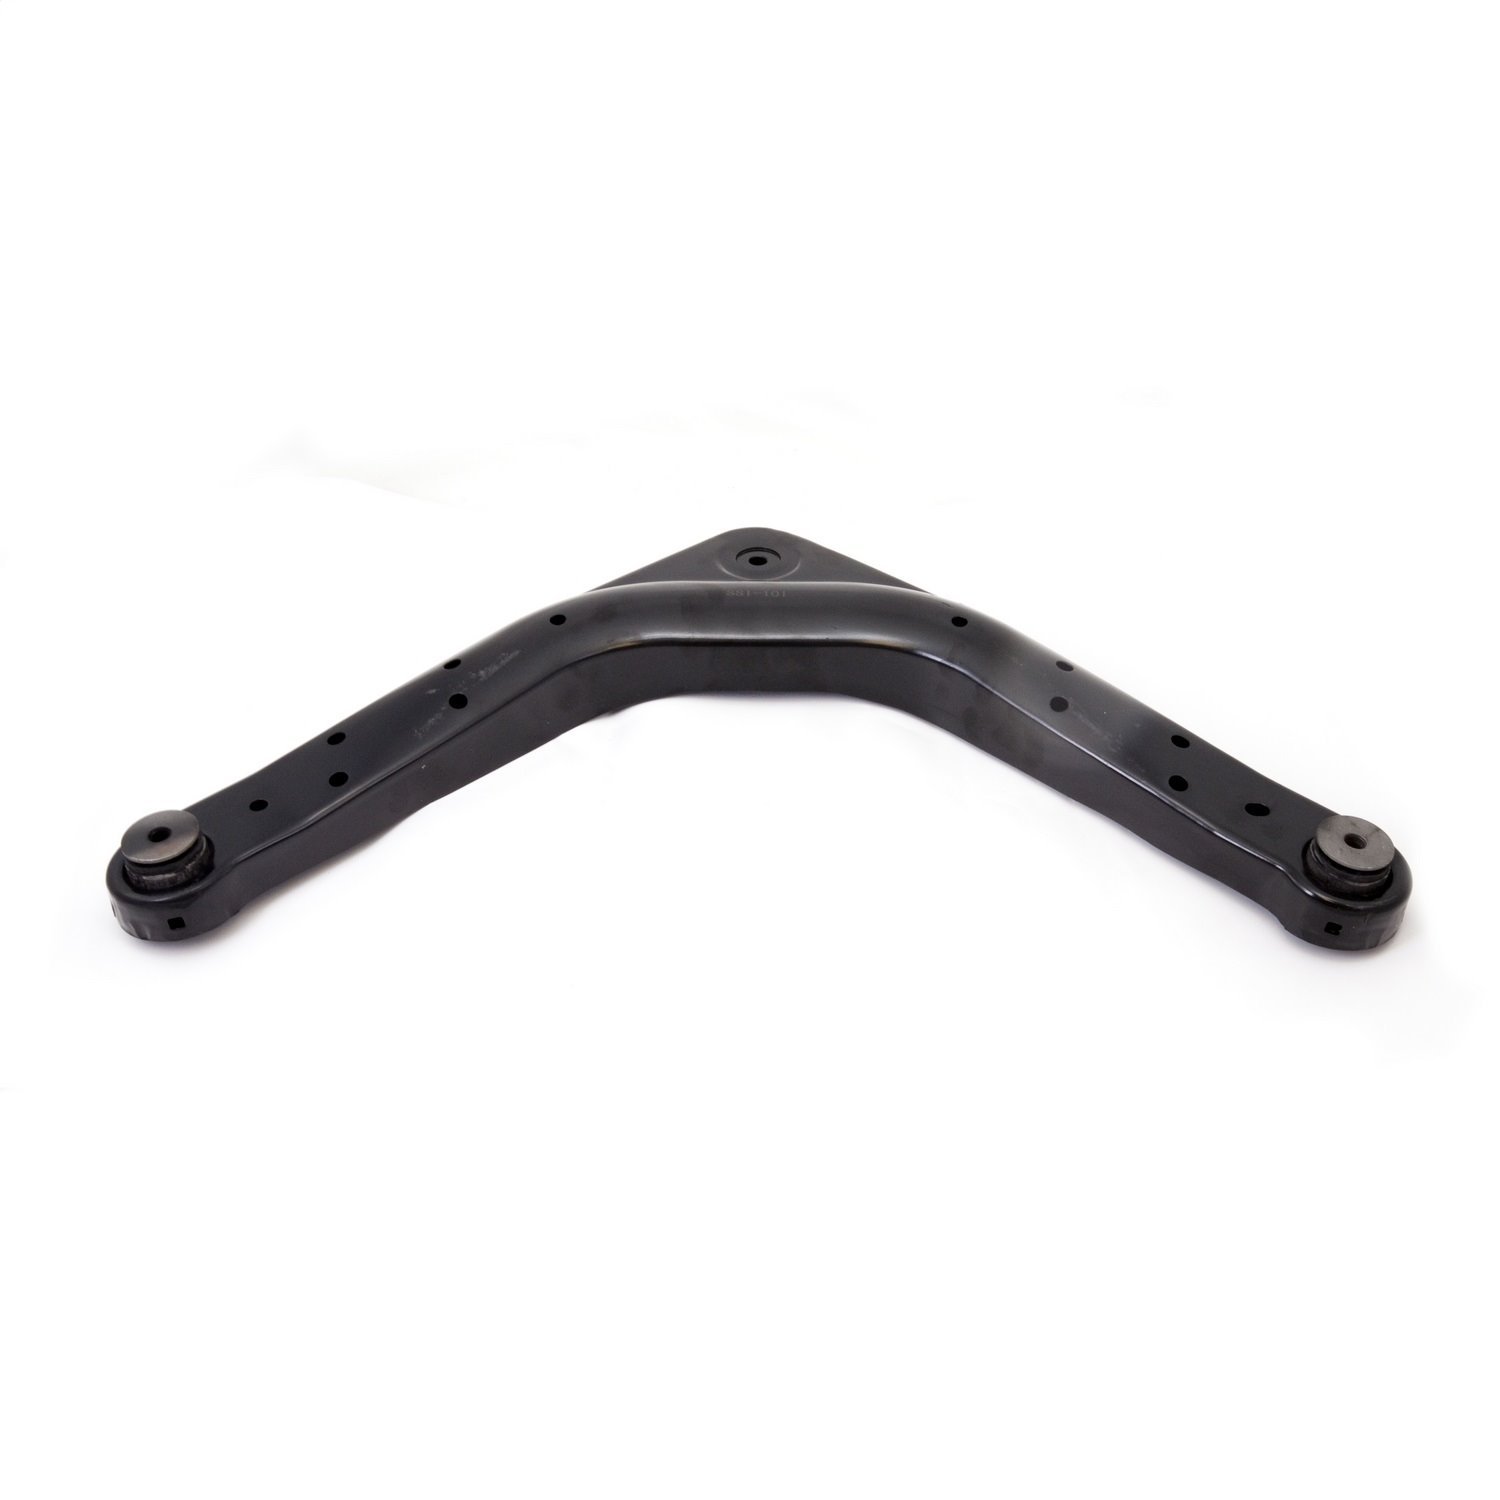 Stock replacement rear upper control arm from Omix-ADA,